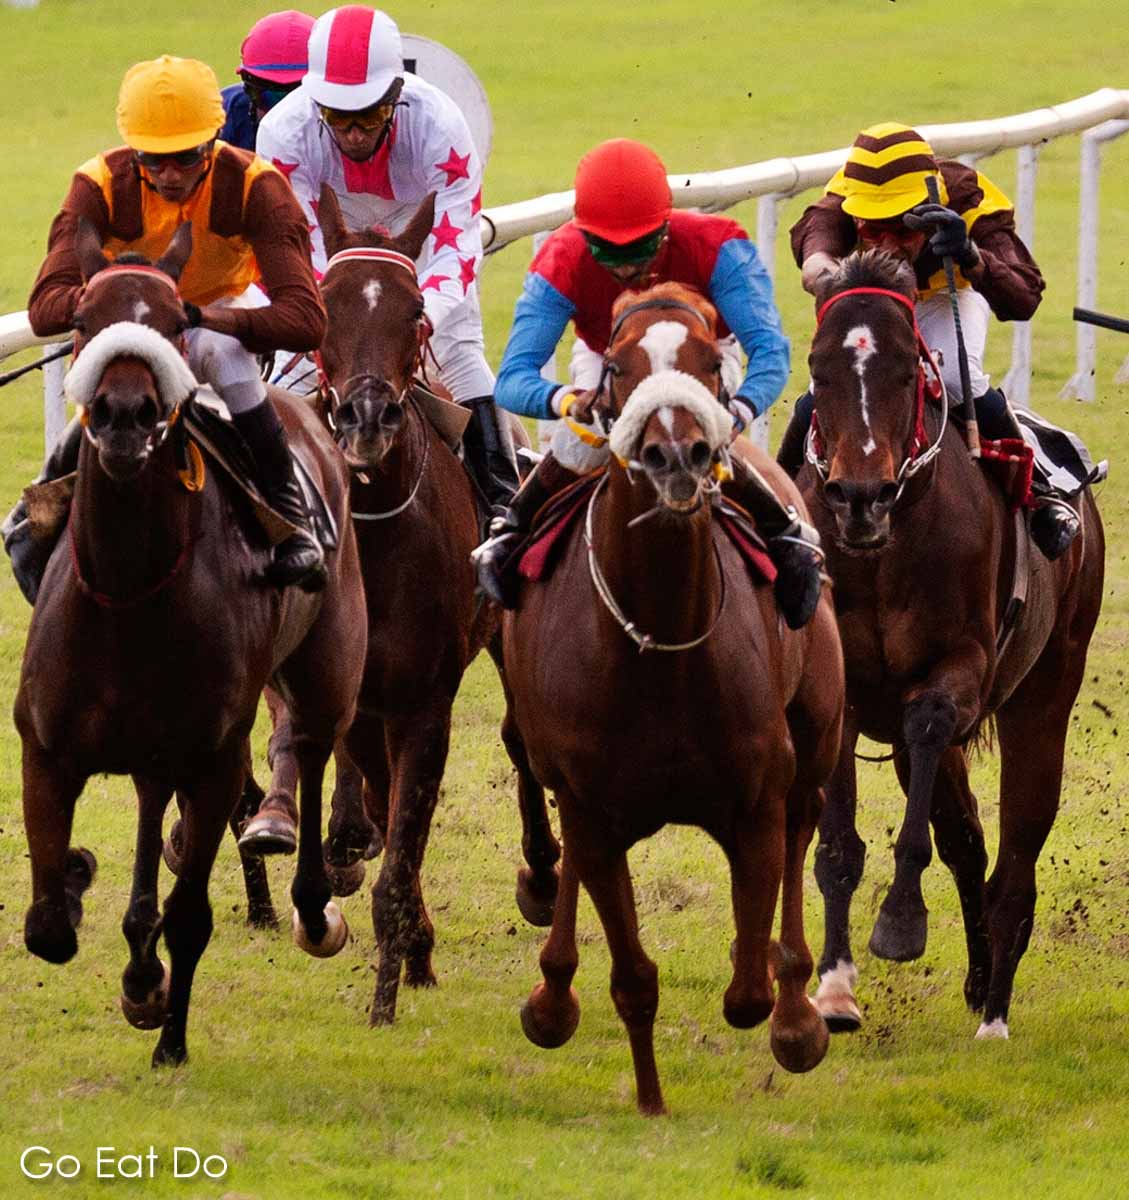 Aintree Racecourse hosts the Grand National Festival